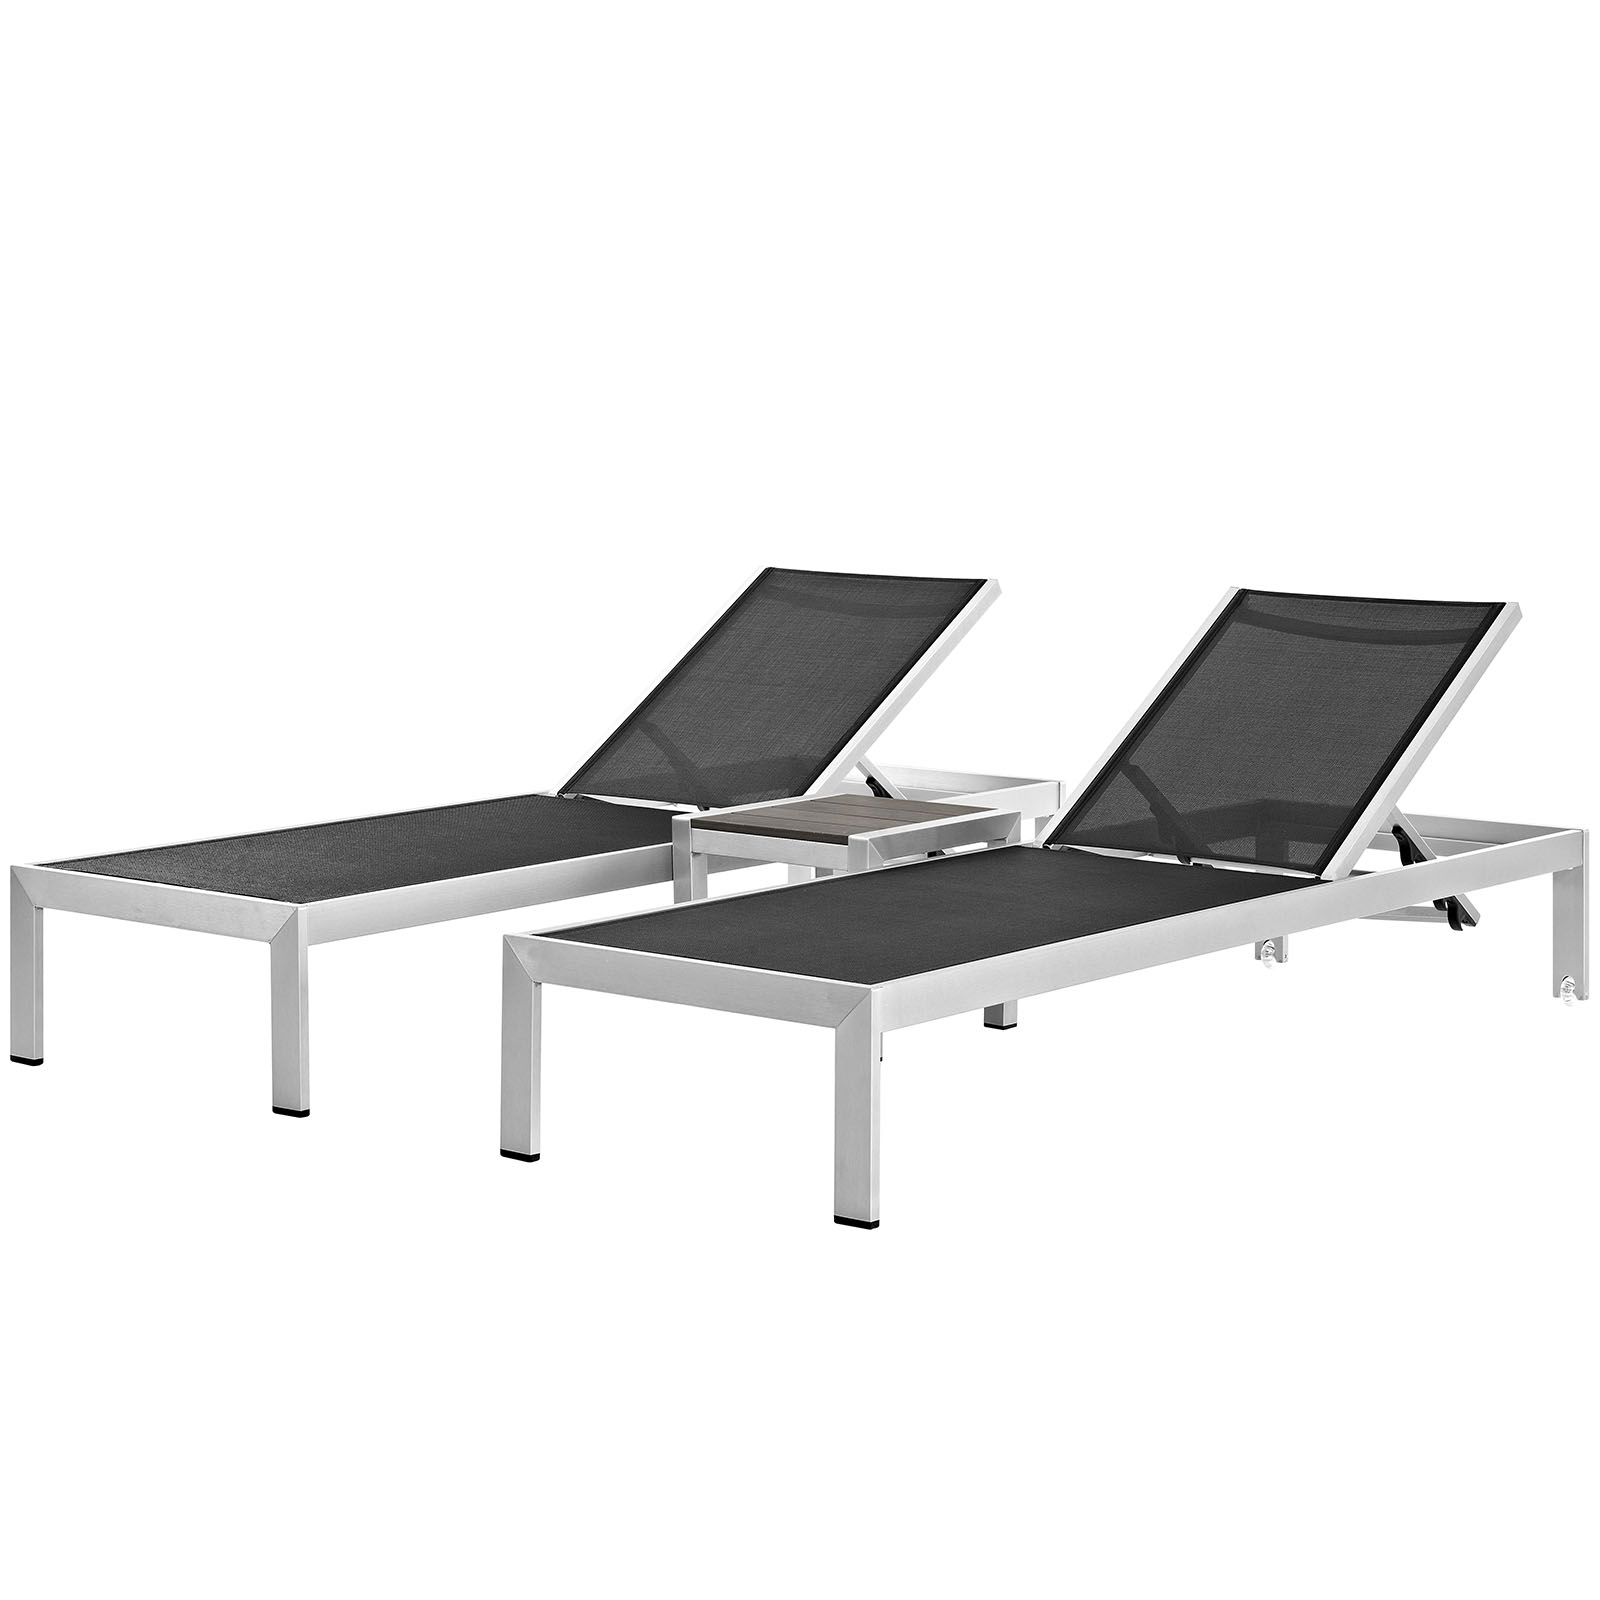 Modern Contemporary Urban Outdoor Patio Balcony Garden Furniture Lounge Chair Chaise and Side Table Set, Aluminum Metal Steel, Black - image 1 of 7